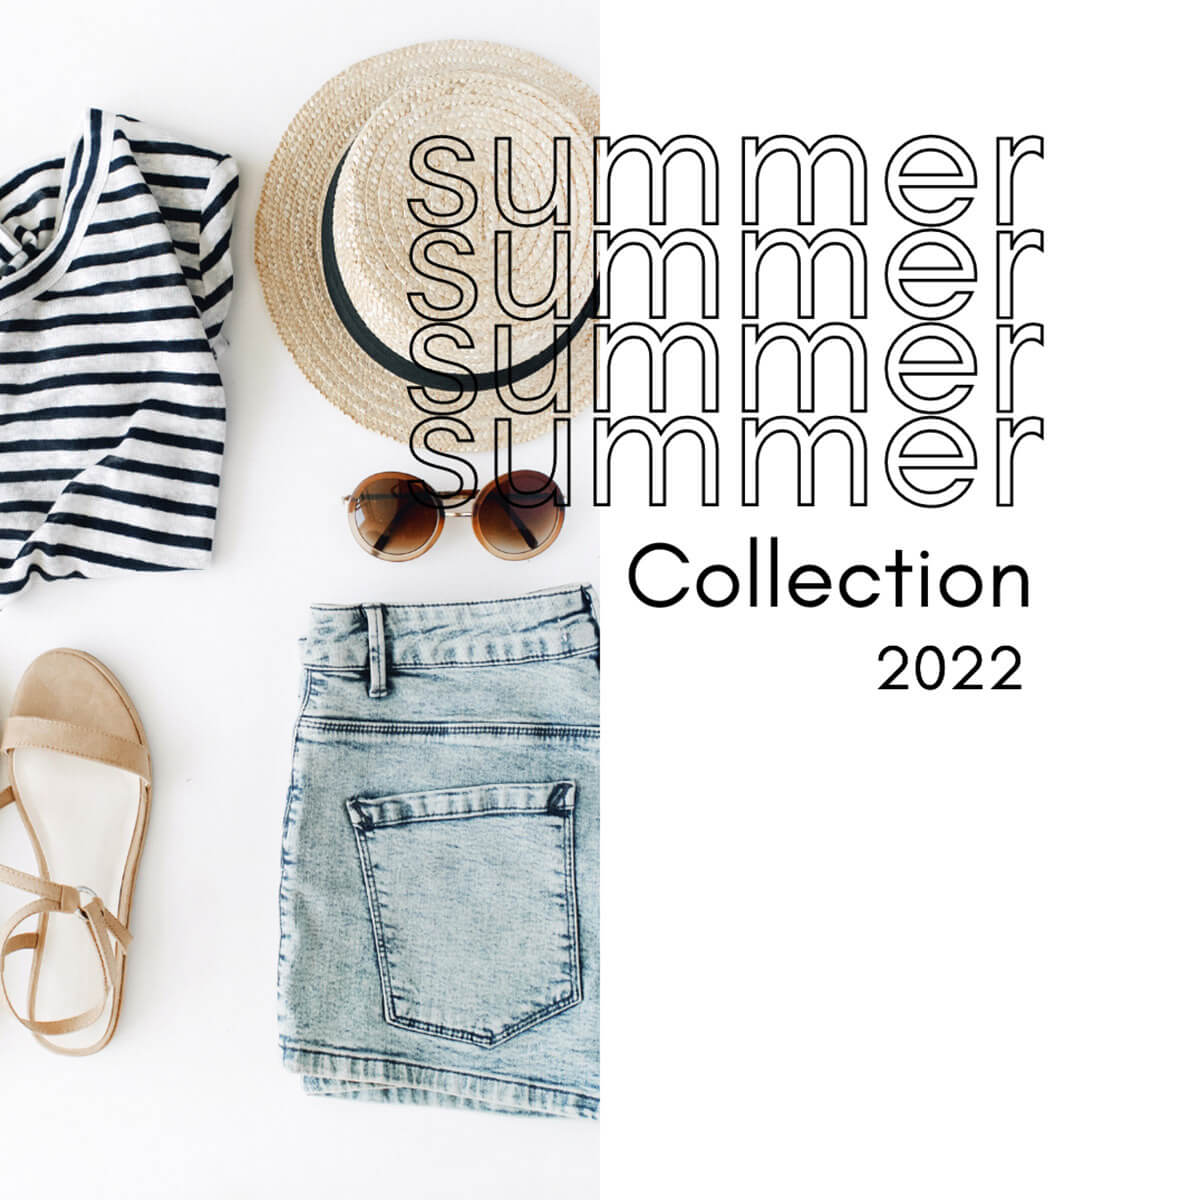 New Summer Collection 2022 – Transforming Runway Trends into Wearable Style